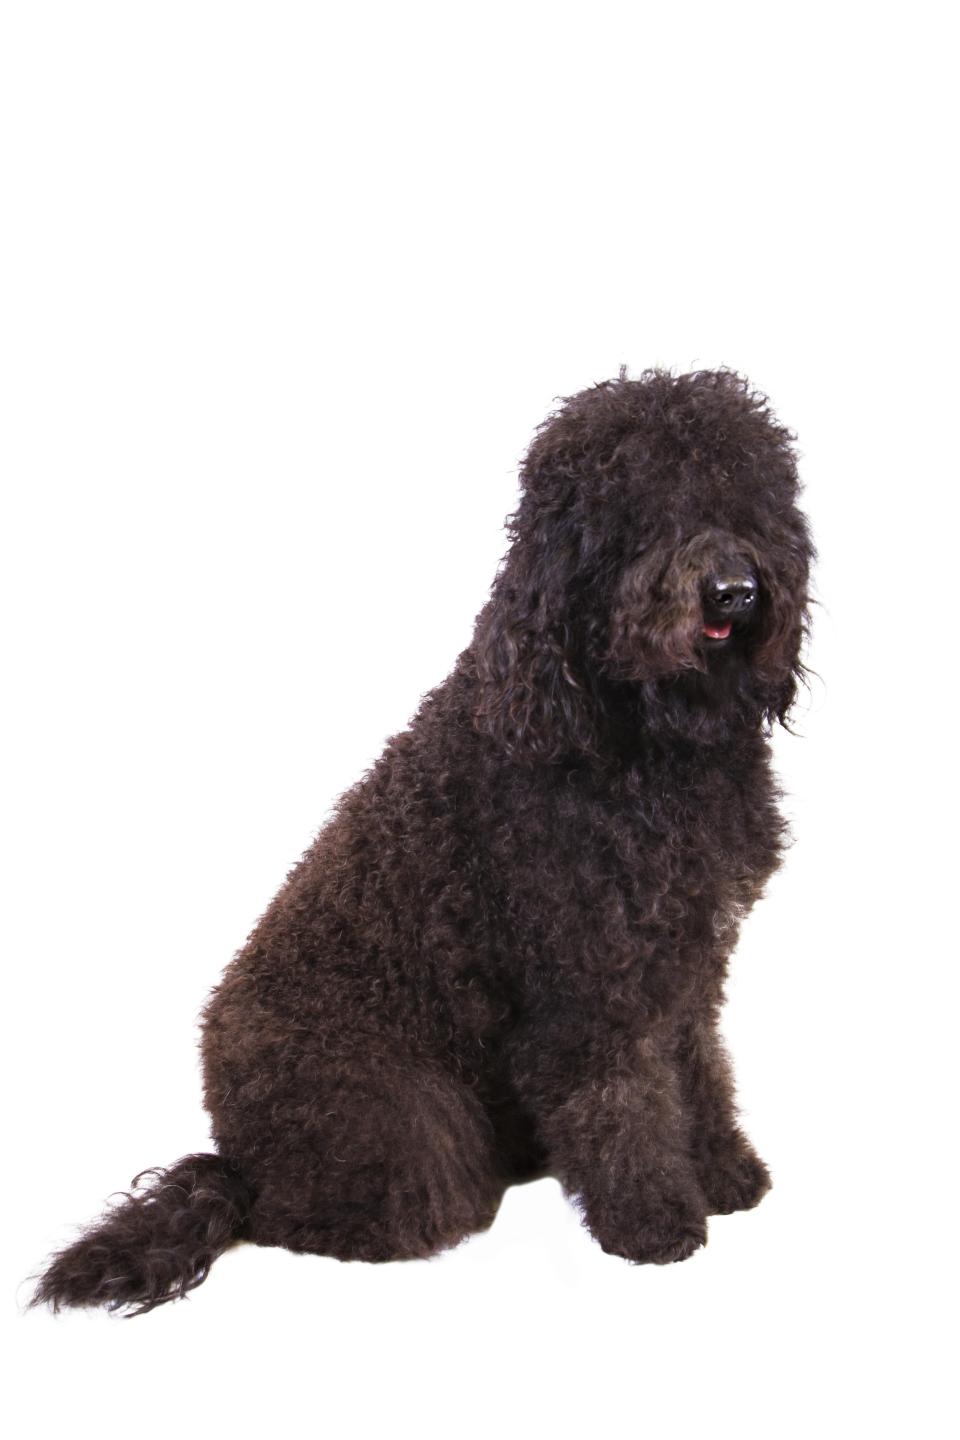 In this Dec. 13, 2013 photo provided by the Westminster Kennel Club is a barbet. The sociable French water dog has made the American Kennel Club's list of recognized breeds. The club announced that the barbet can compete starting Wednesday, Jan. 1, 2020 in traditional, breed-judging shows. (American Kennel Club via AP)